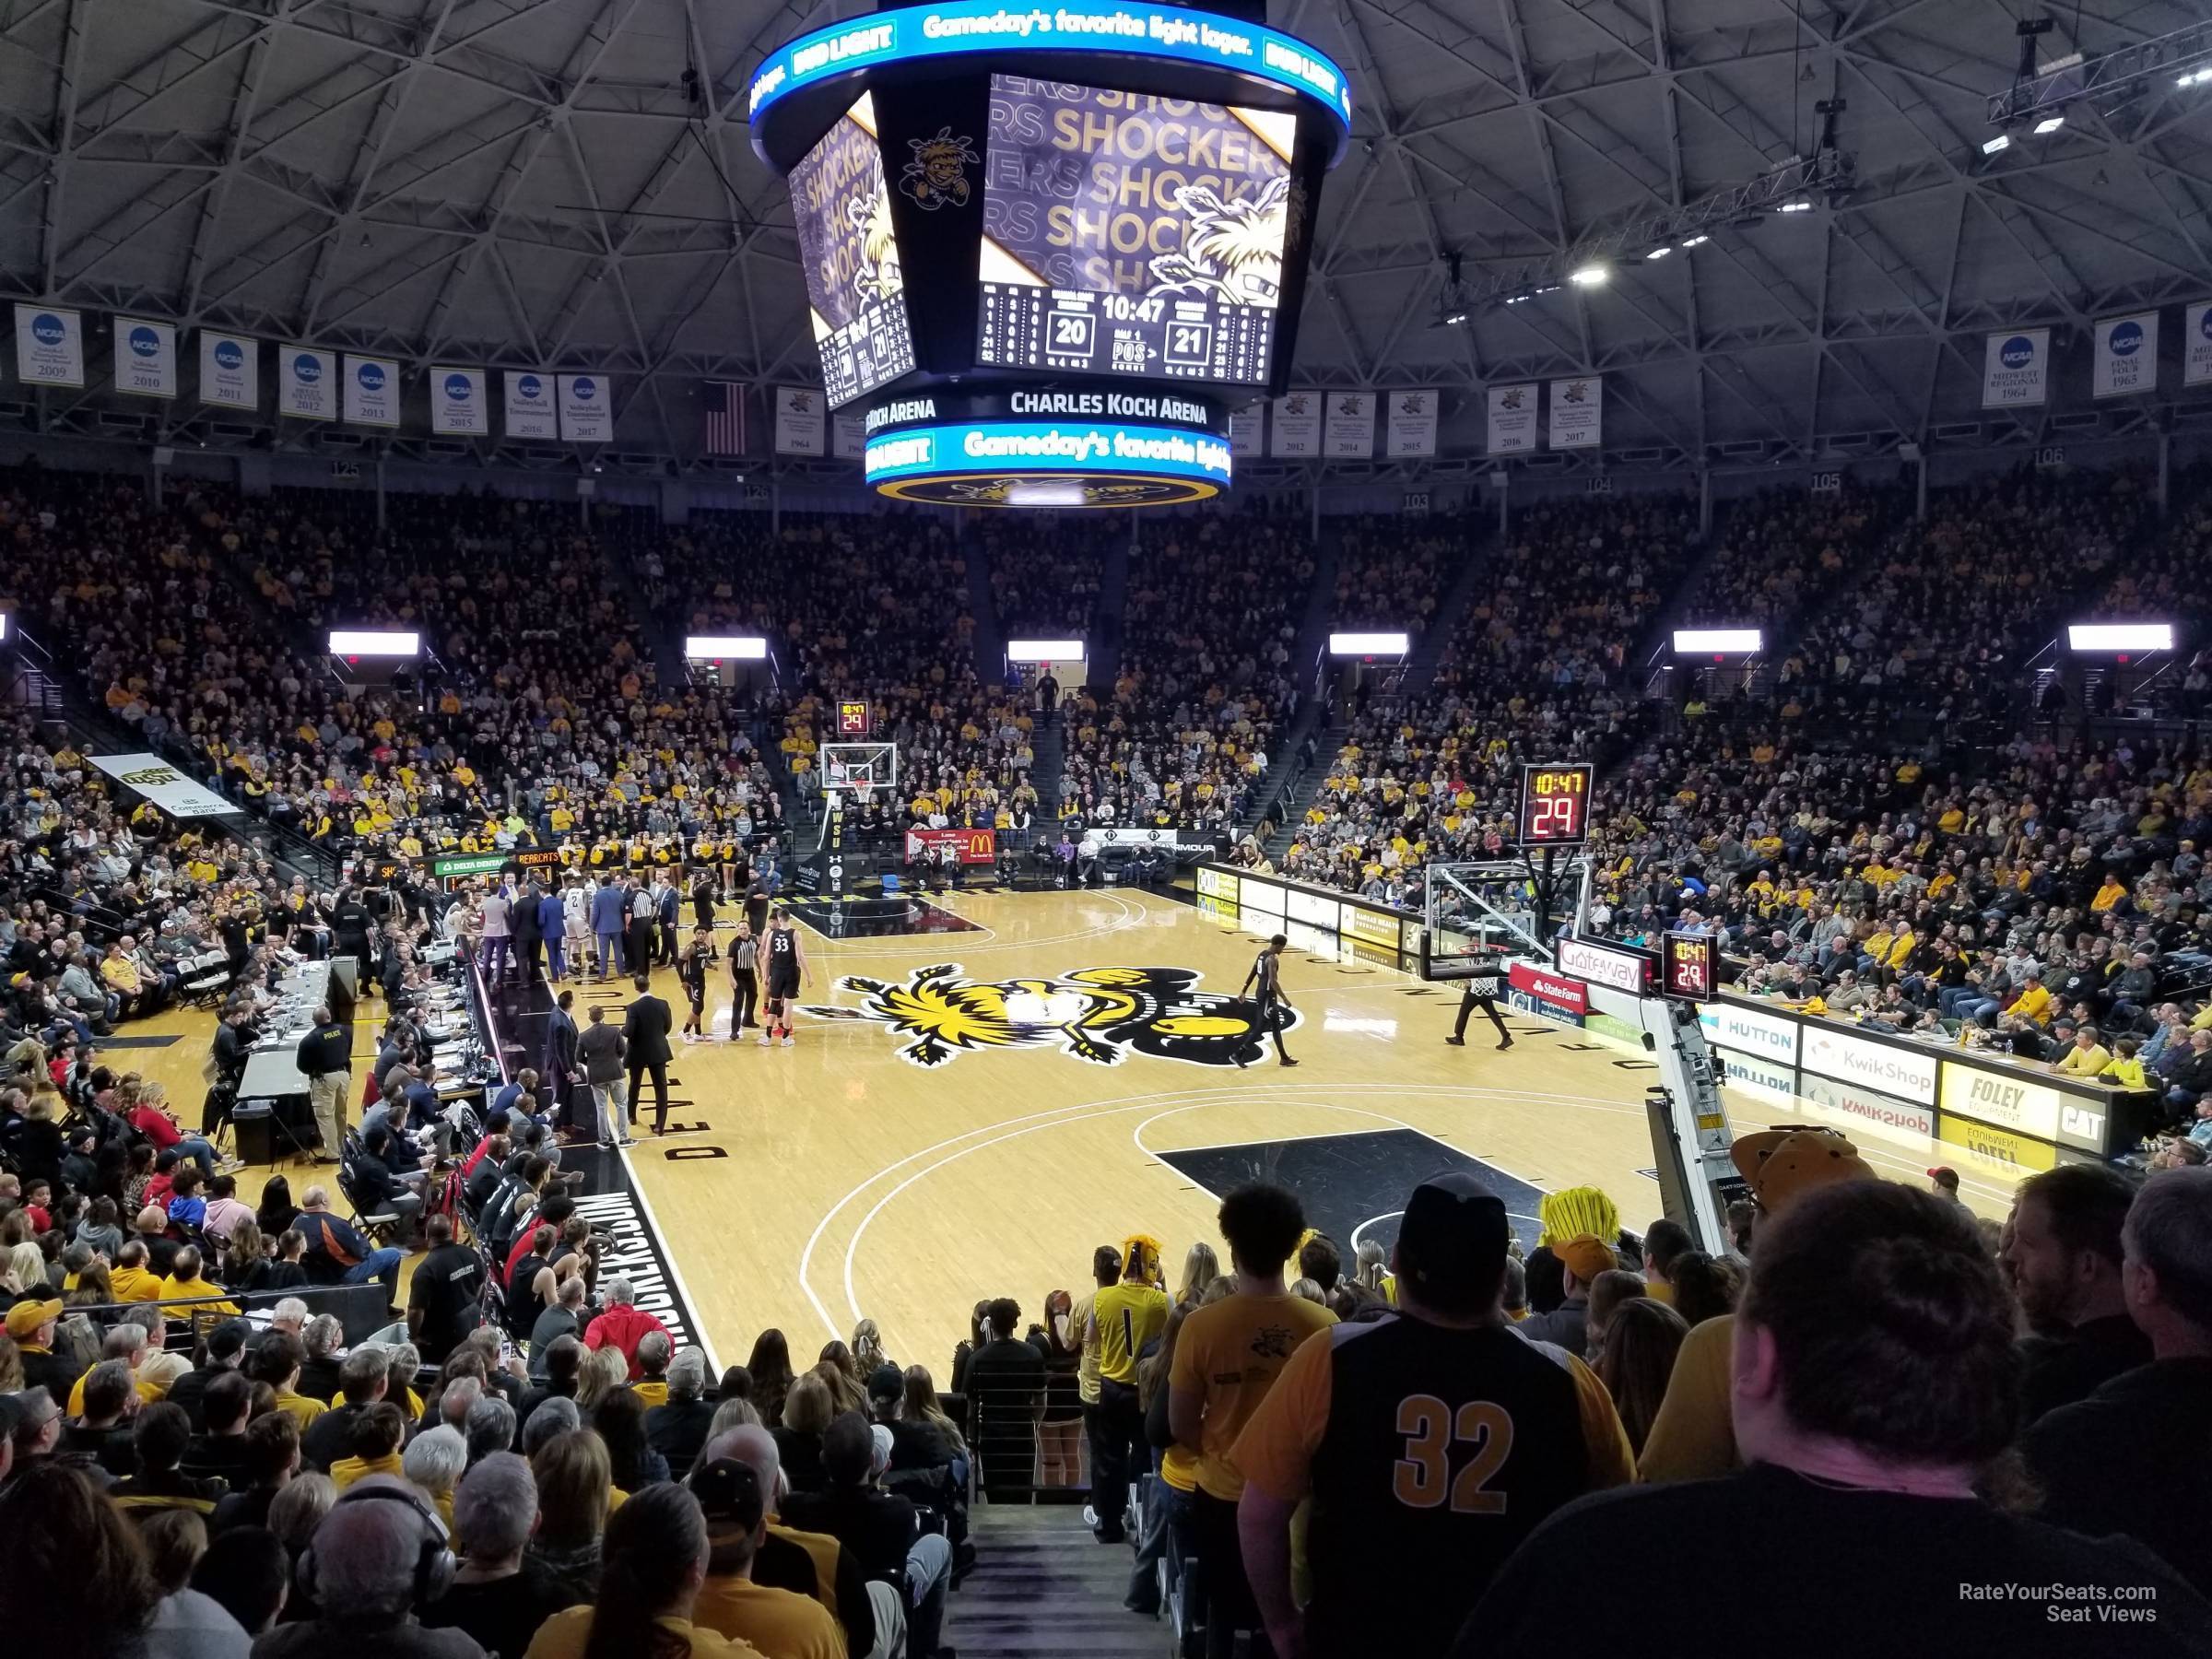 section 117, row 16 seat view  - charles koch arena